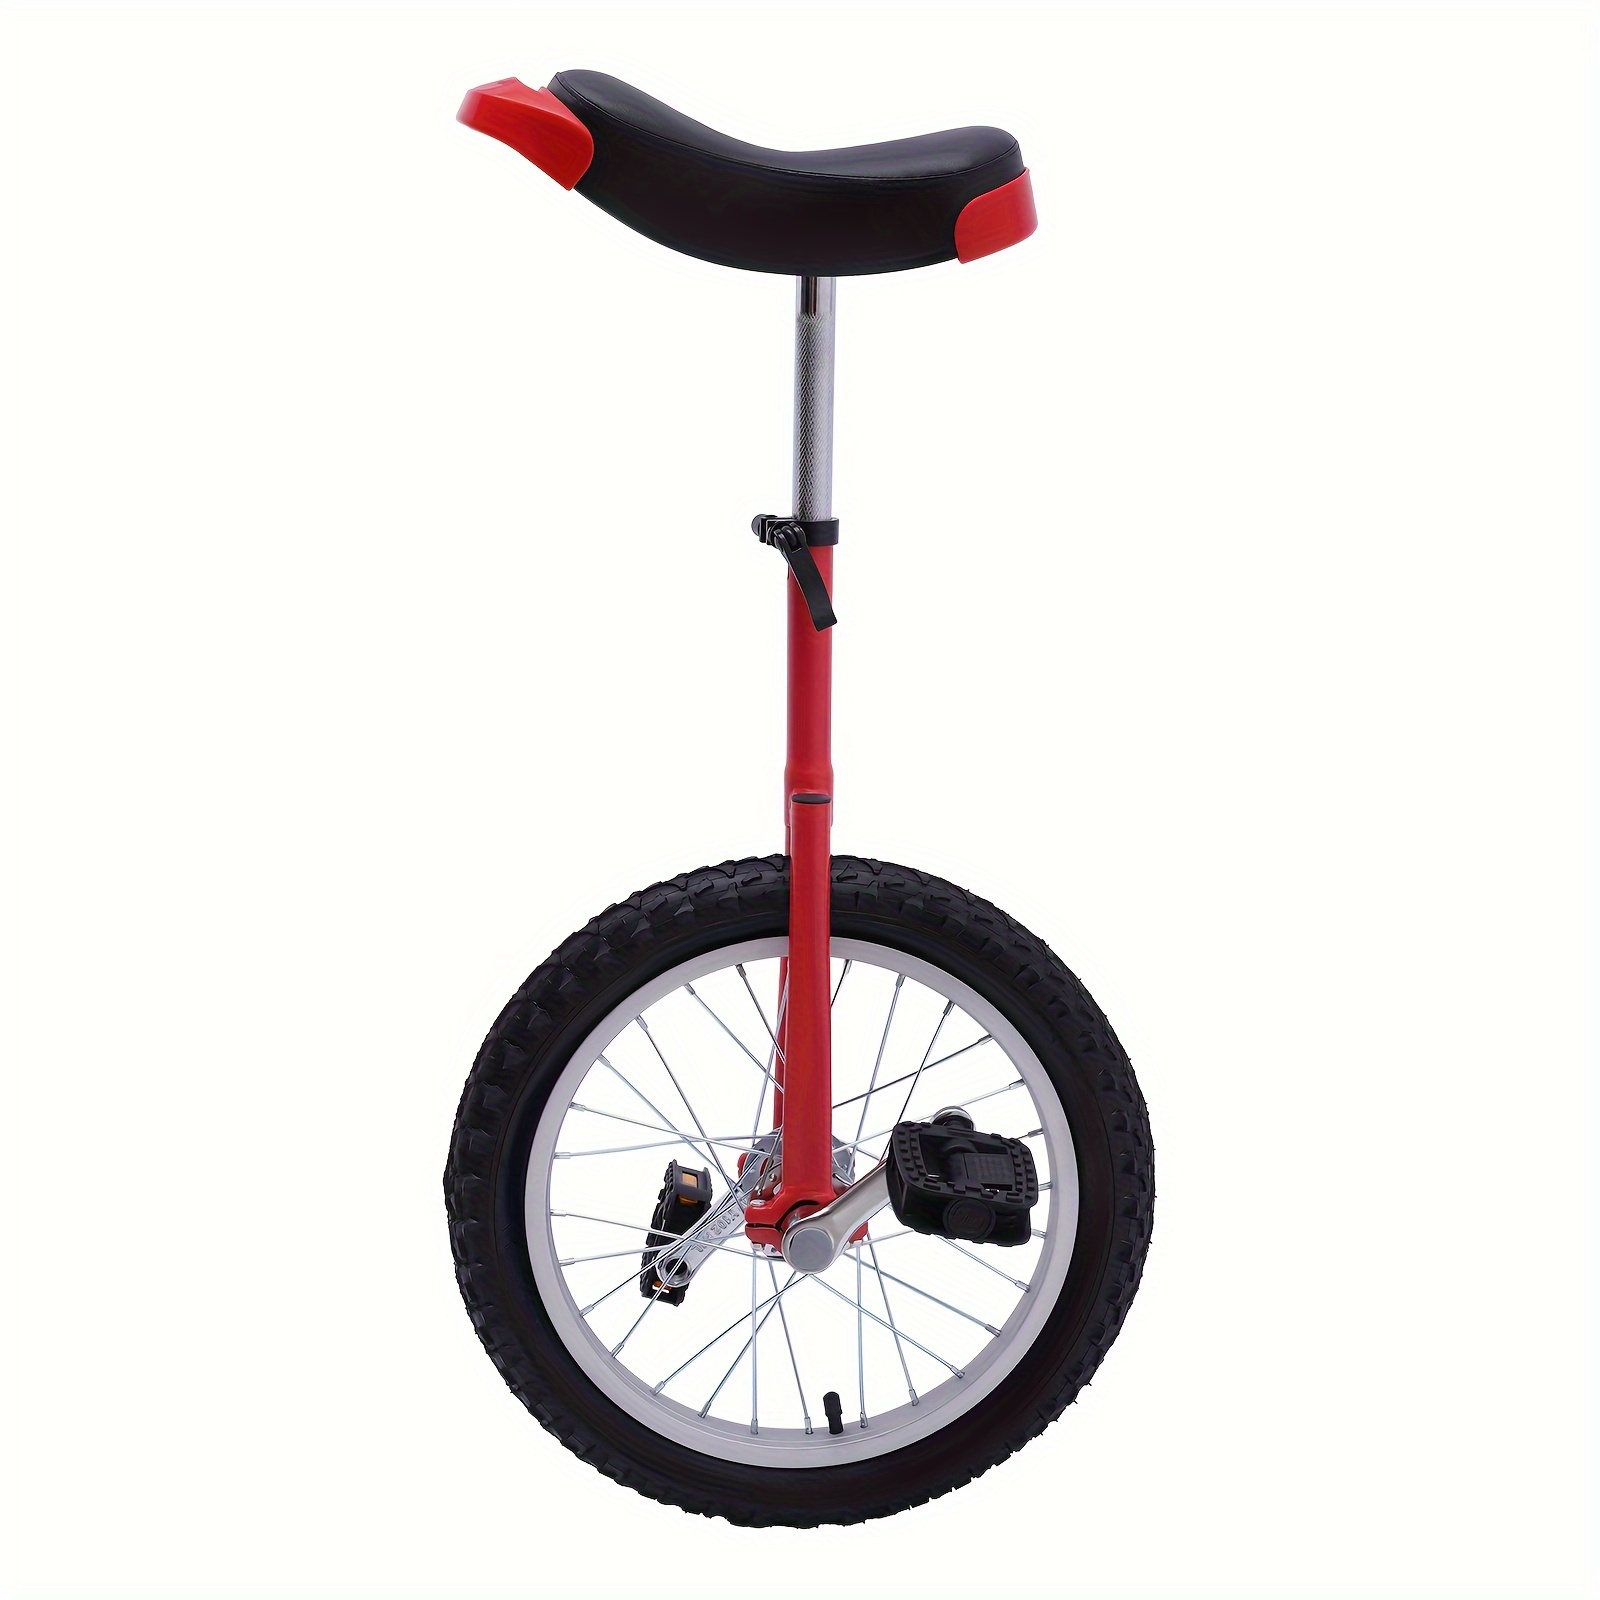 

16 Inch Wheel Unicycle Chrome Unicycles Cycling Outdoor Sports Fitness Exercise